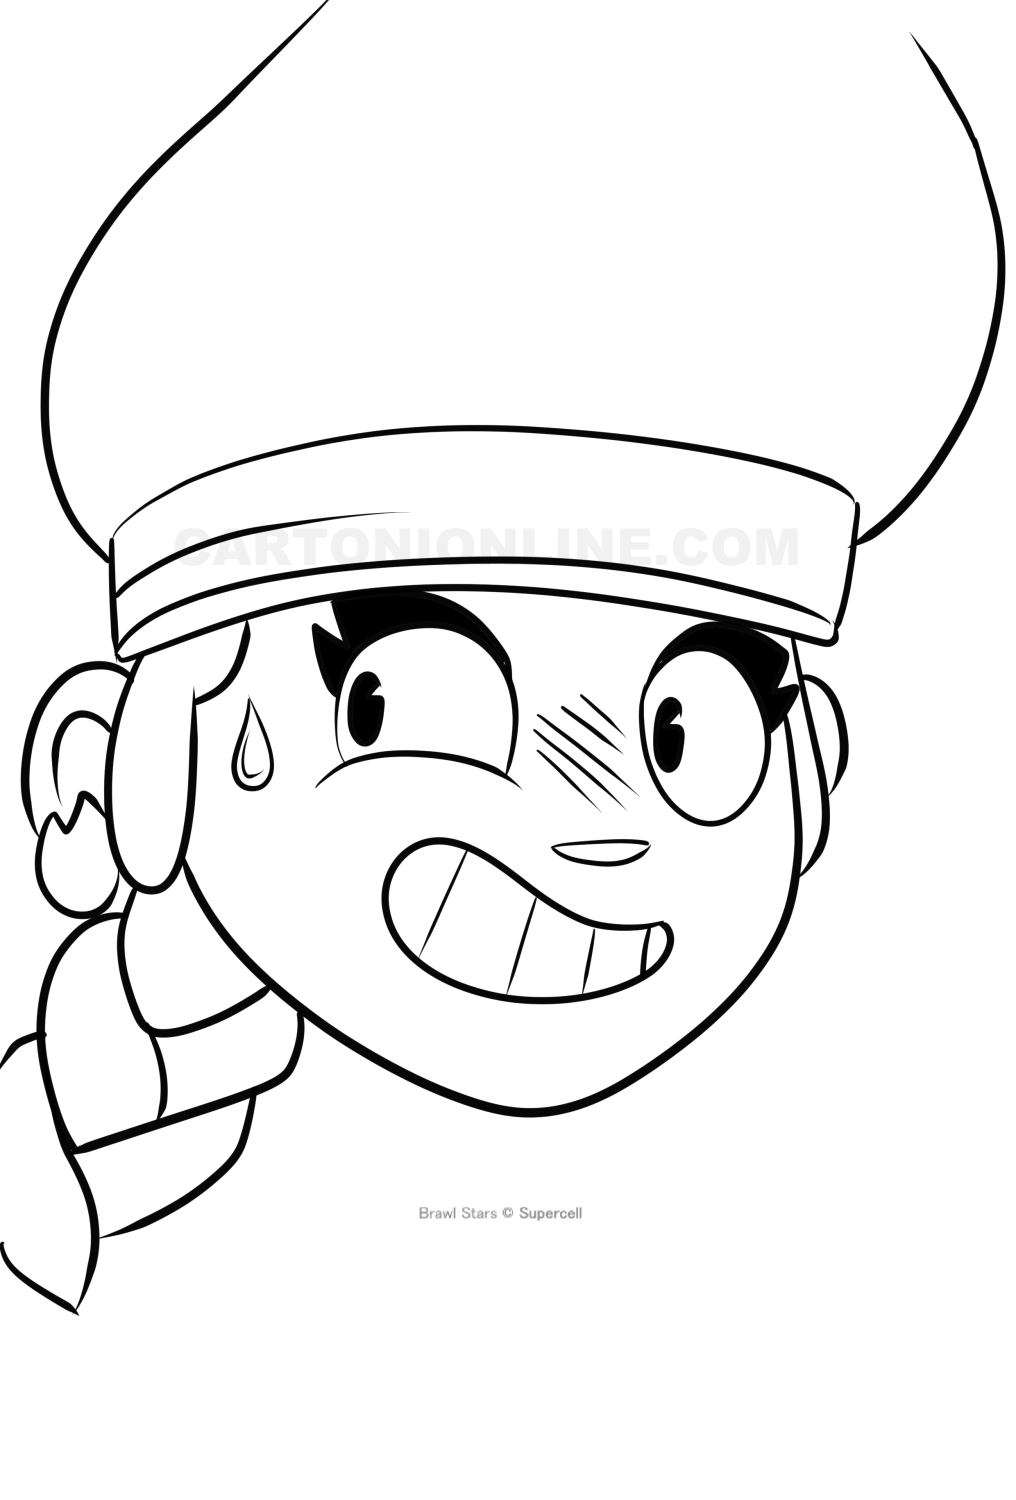 Amber 08 from Brawl Stars coloring page to print and coloring